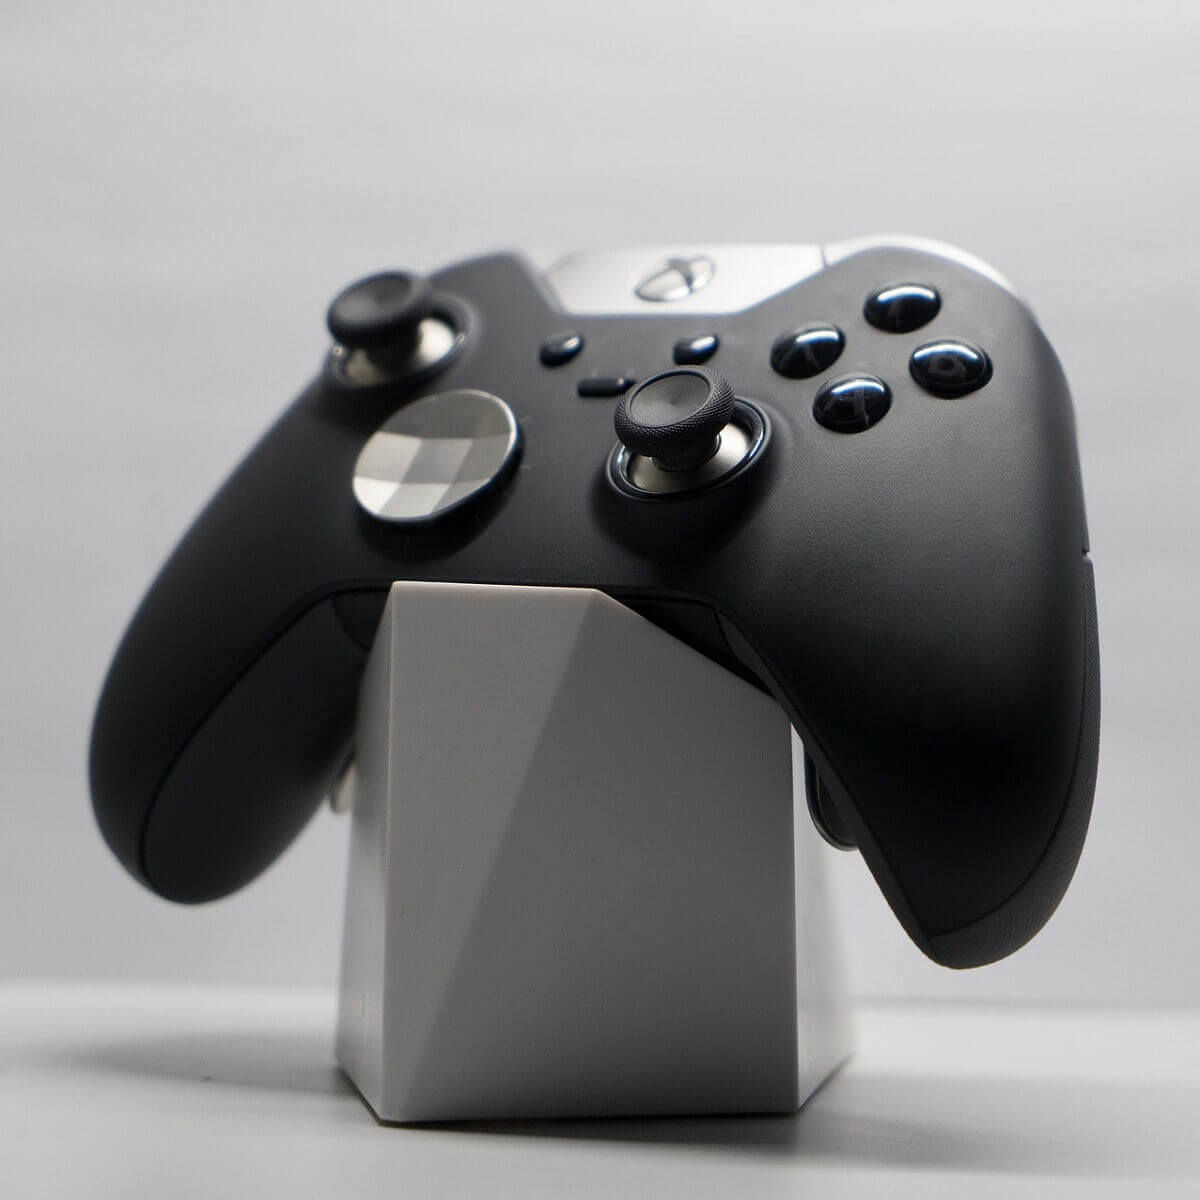 Pride Strip off Complaint Xbox One S Controller won't connect to Android [QUICK FIXES]